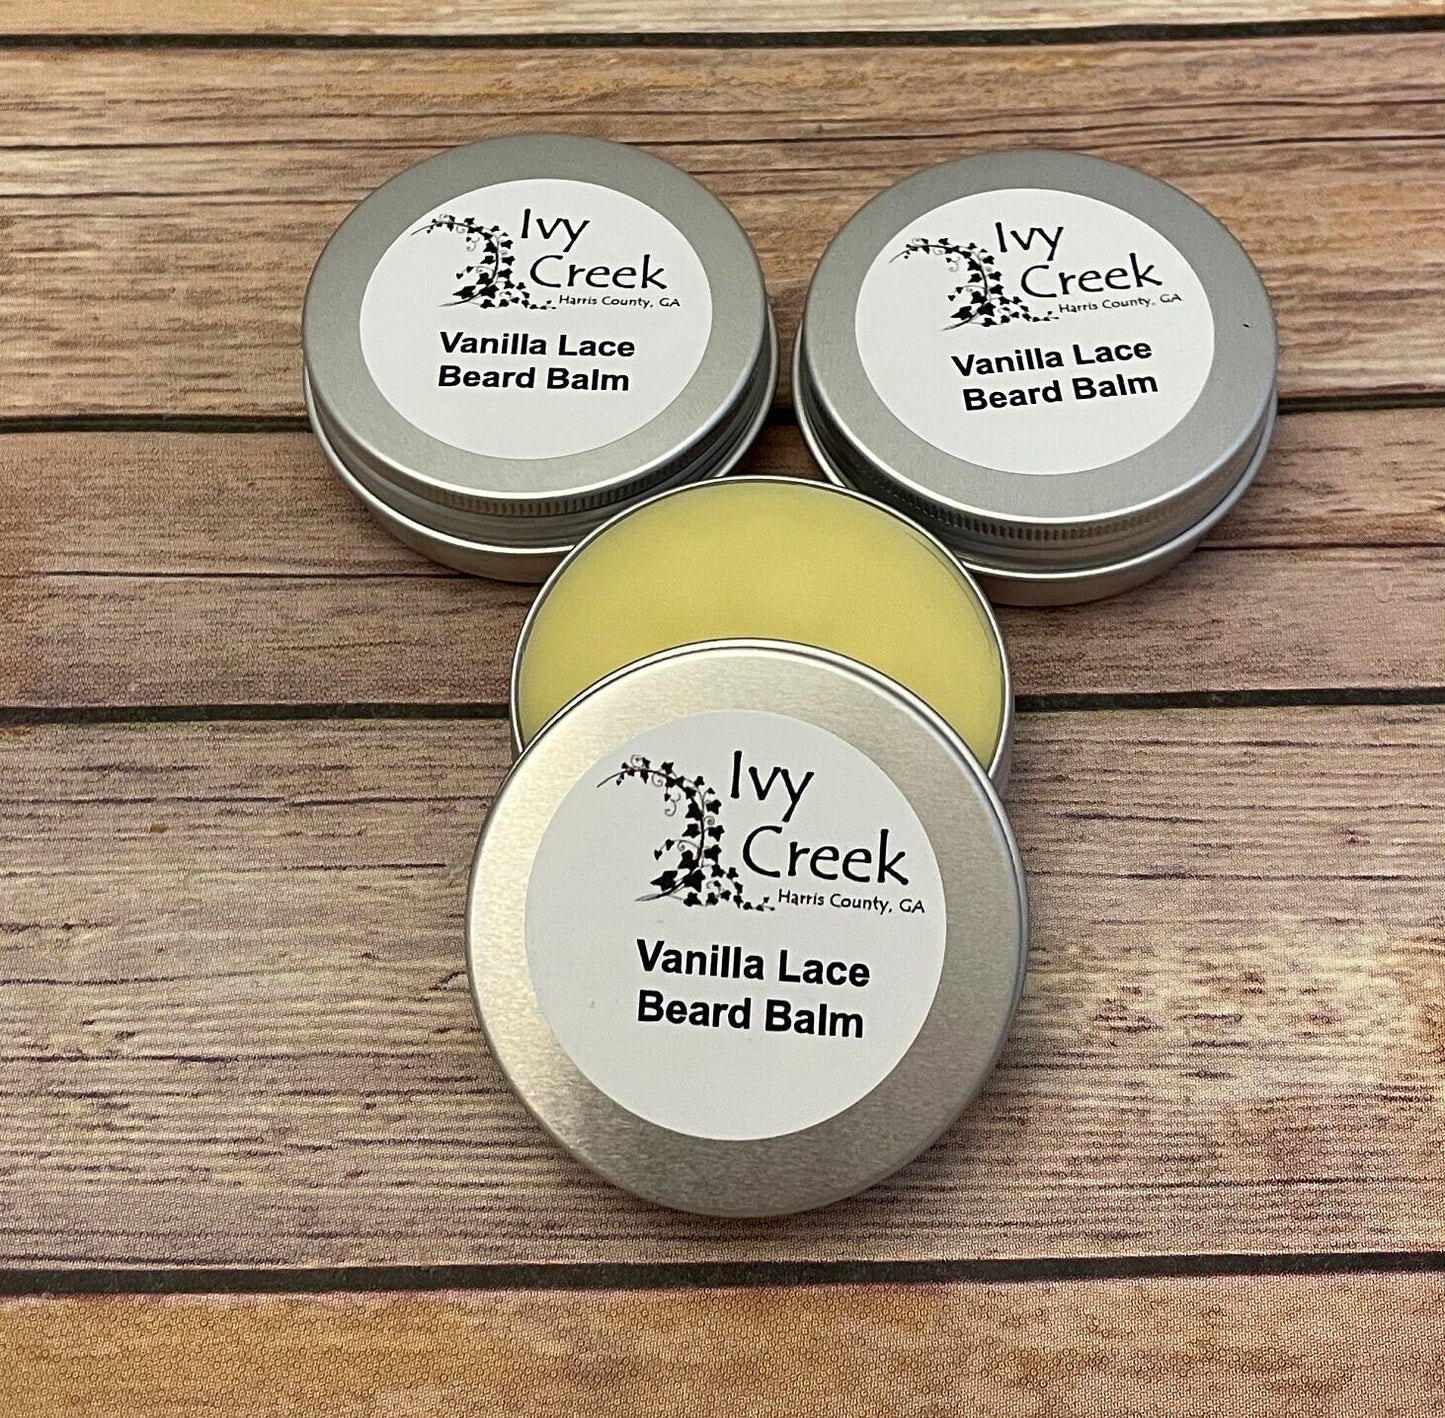 Ivy Creek Vanilla Lace Beard Balm | Natural Conditioning for Your Manly Whiskers | 2 oz | Ready to Ship